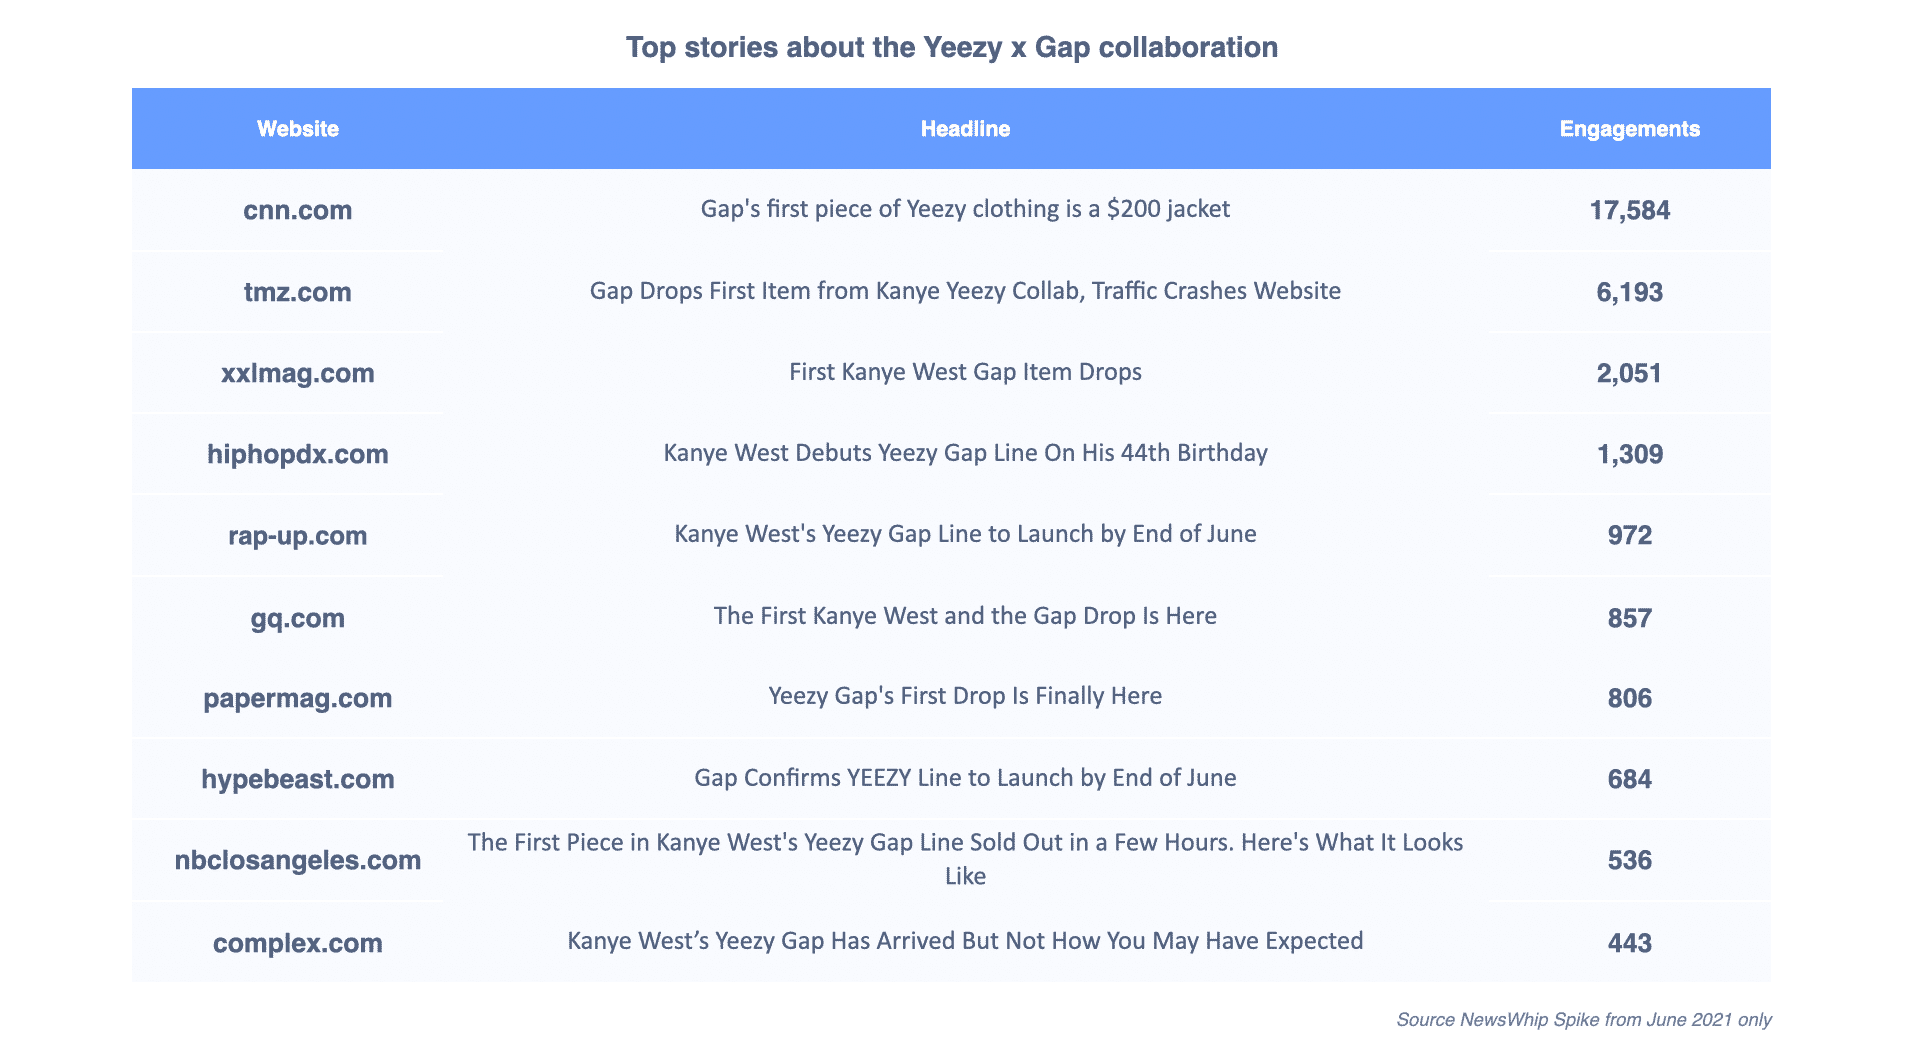 Chart showing the top stories about the Yeezy x Gap collaboration